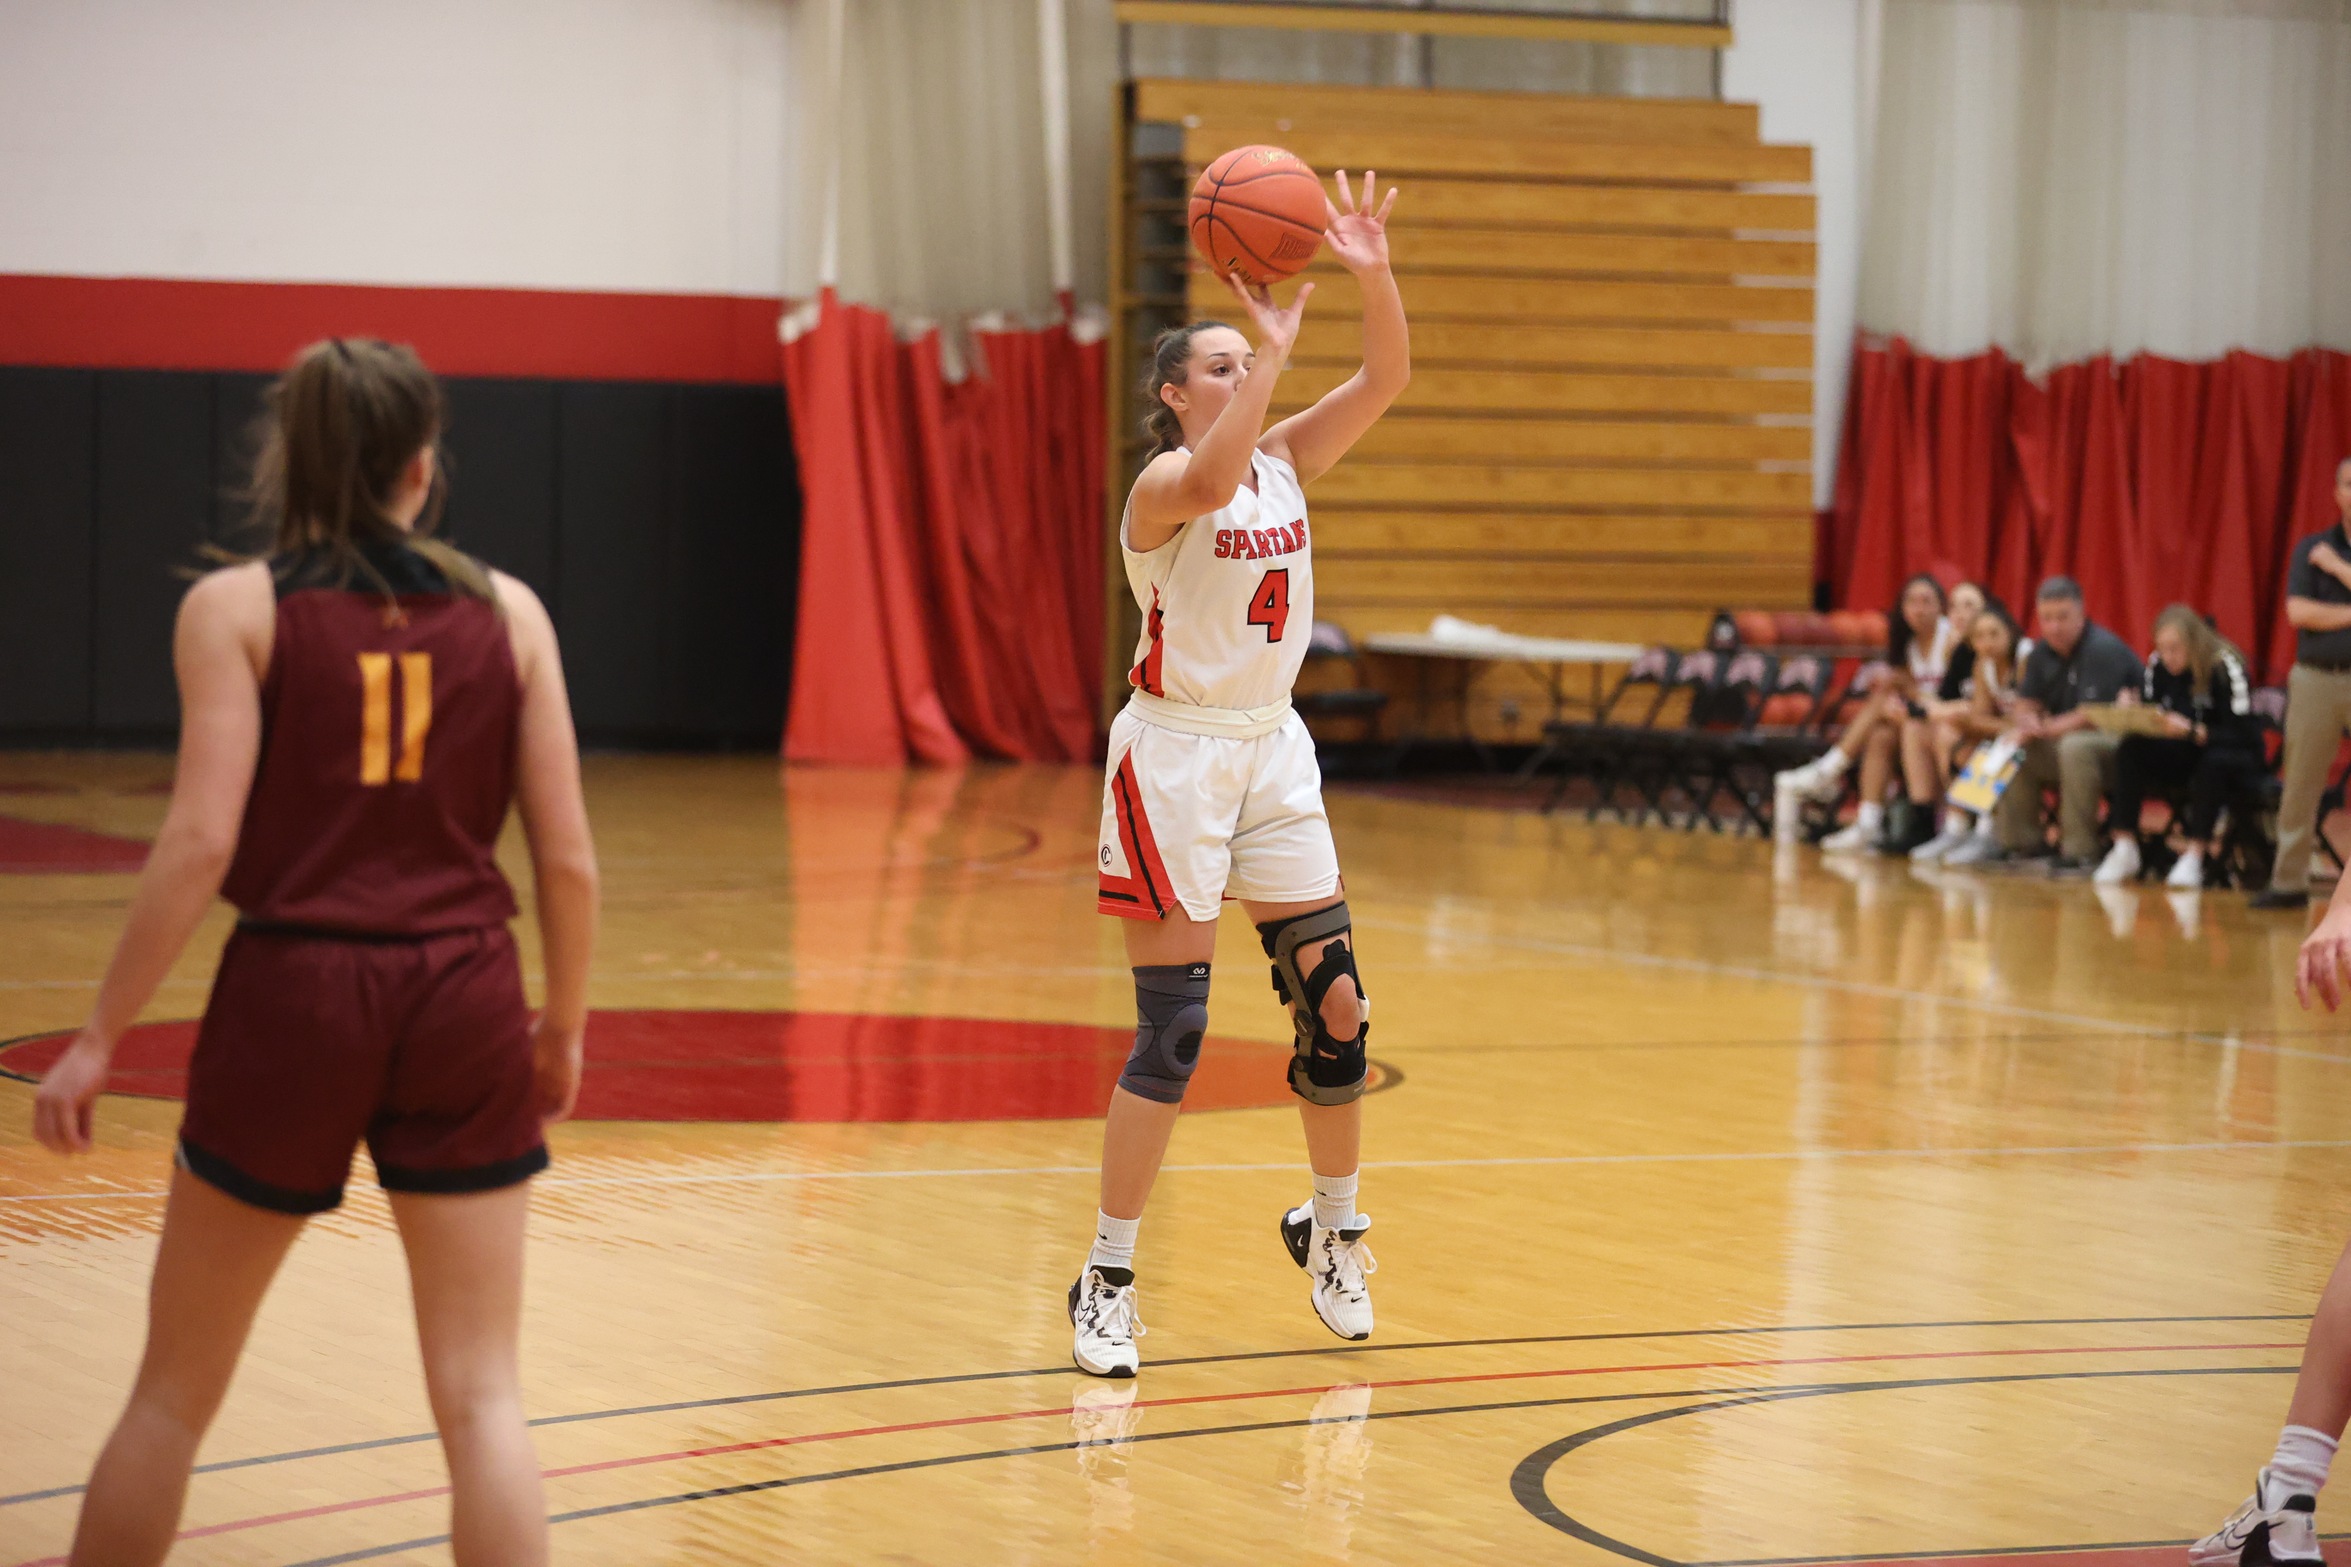 Maddy Weed had 13 points and 5 steals on Sunday.